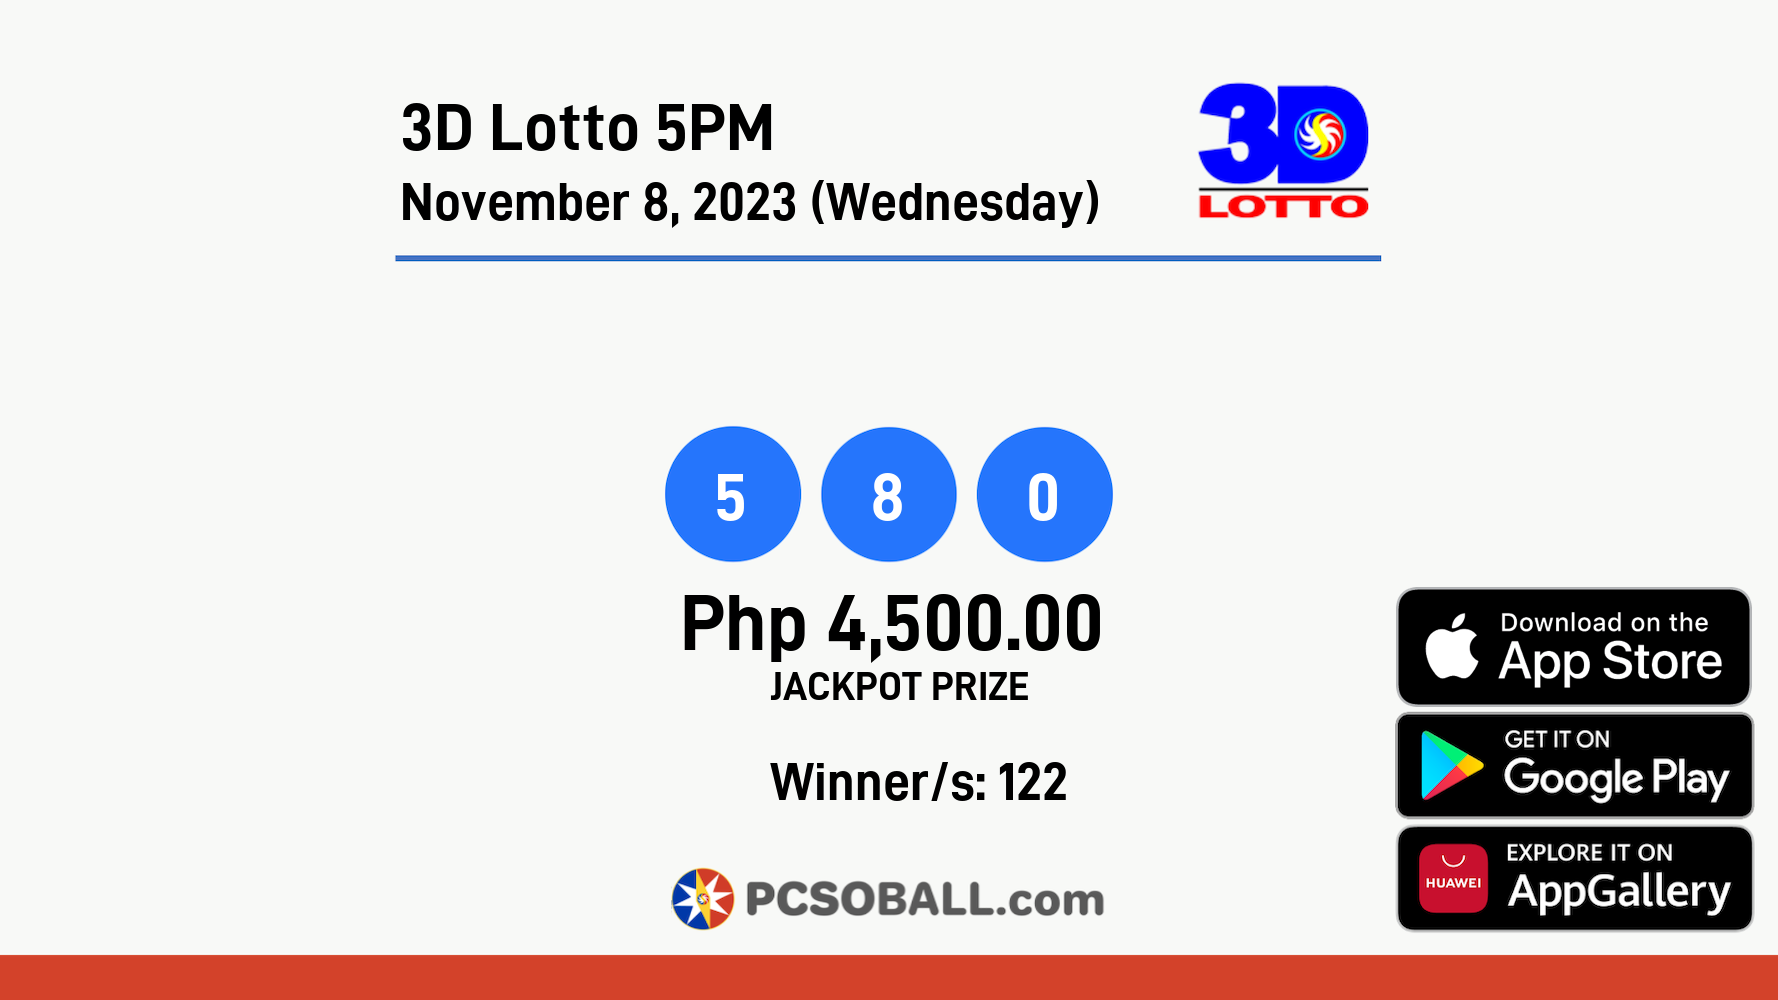 3D Lotto 5PM November 8, 2023 (Wednesday) Result